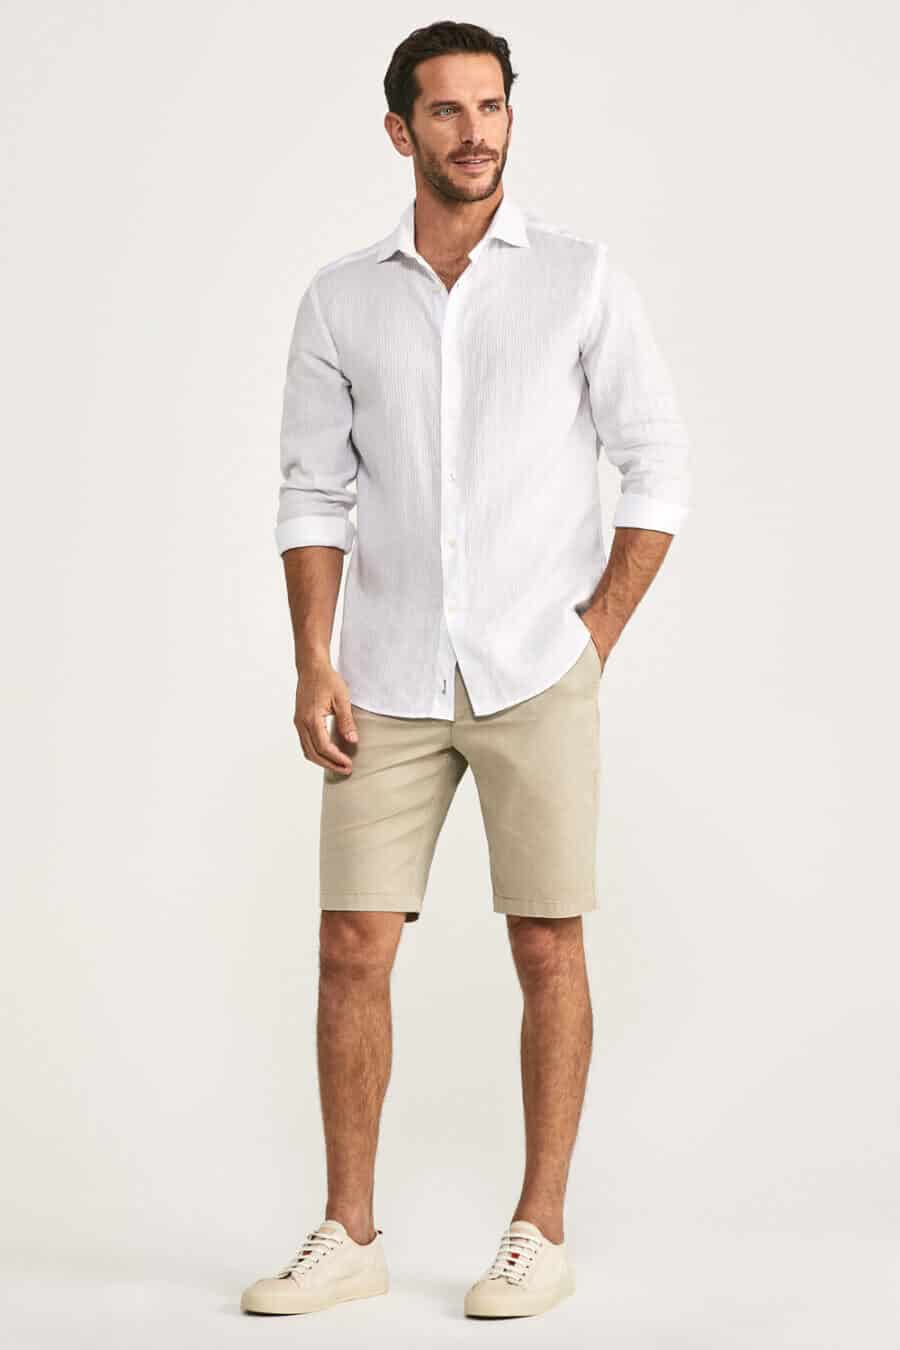 Men's white linen shirt with beige chino shorts and sneakers outfit